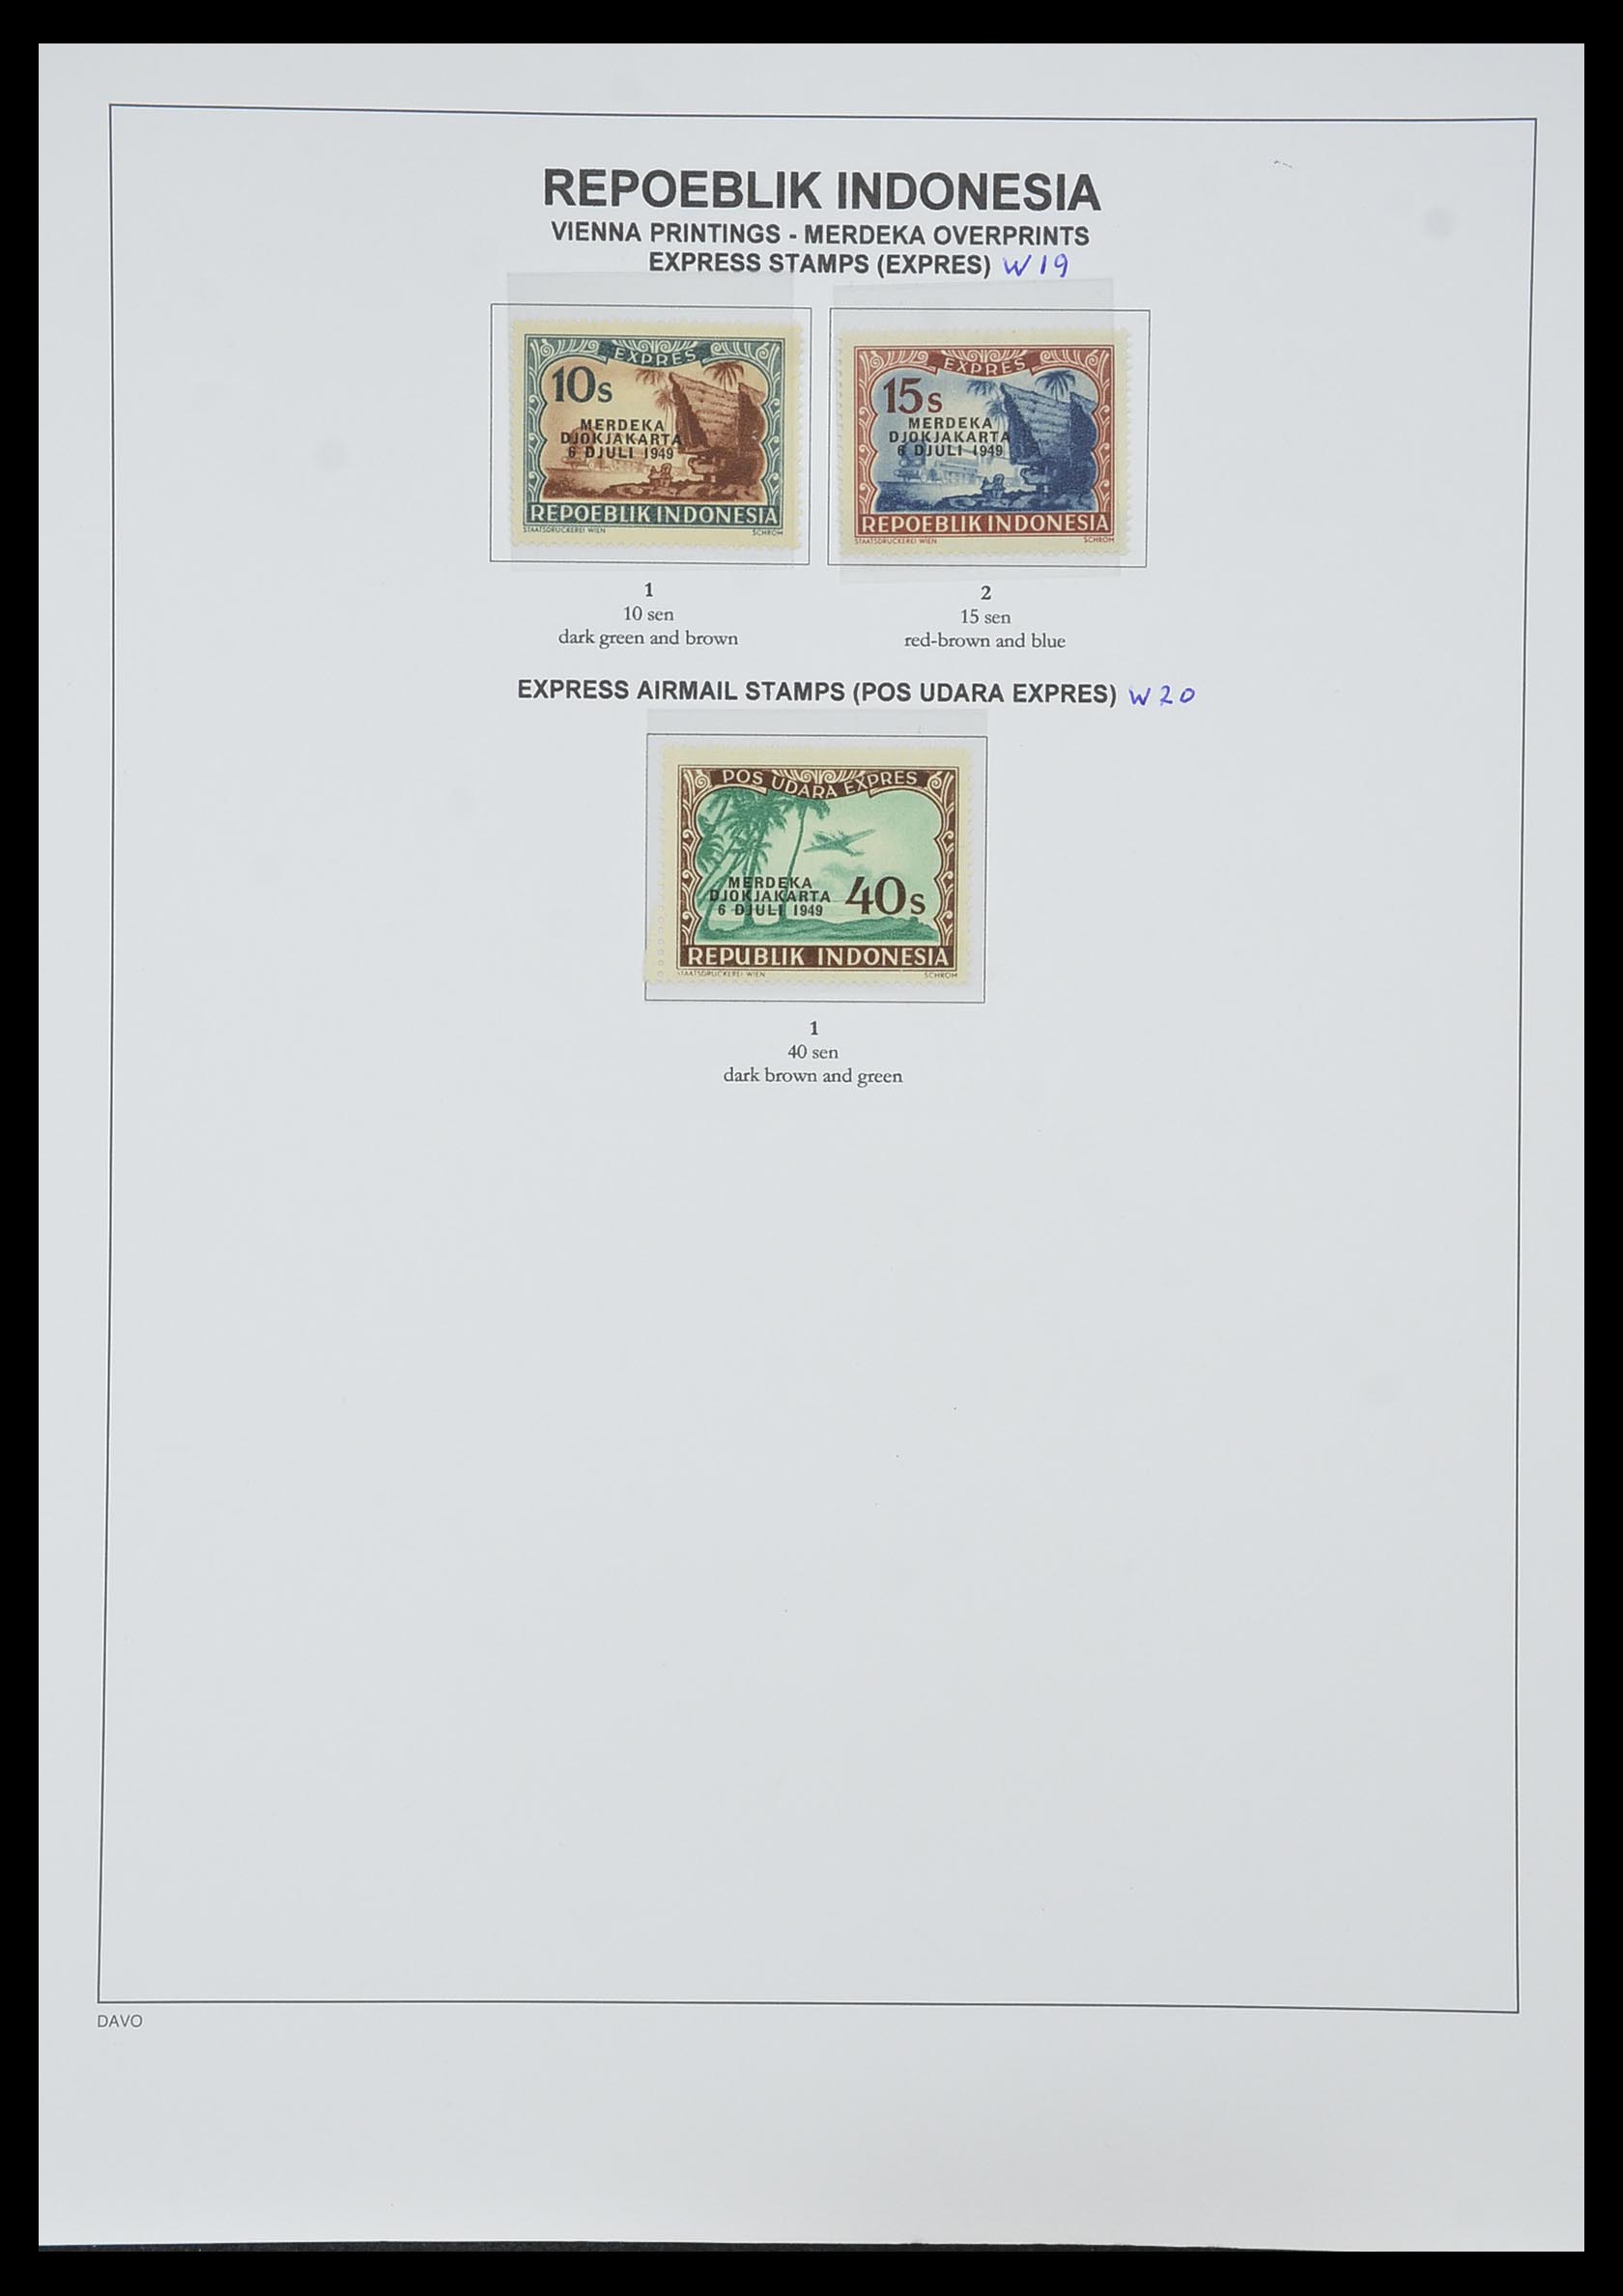 33988 035 - Stamp collection 33988 Vienna printings Indonesia.